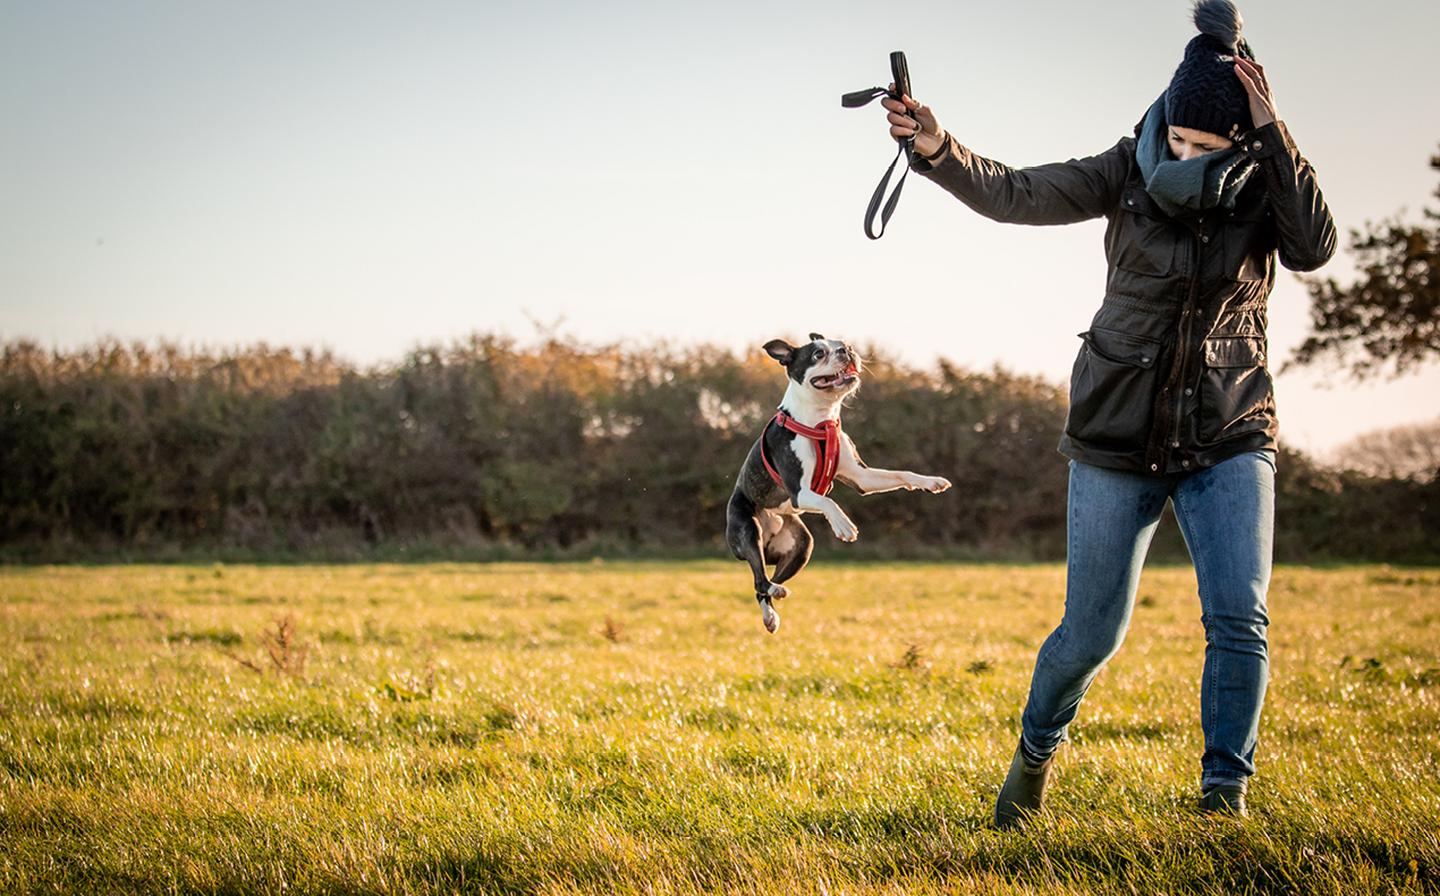 Laura, who works at FatFace HQ, wearing the Sussex Jacket while playing with her cute Boston Terrier in a local field